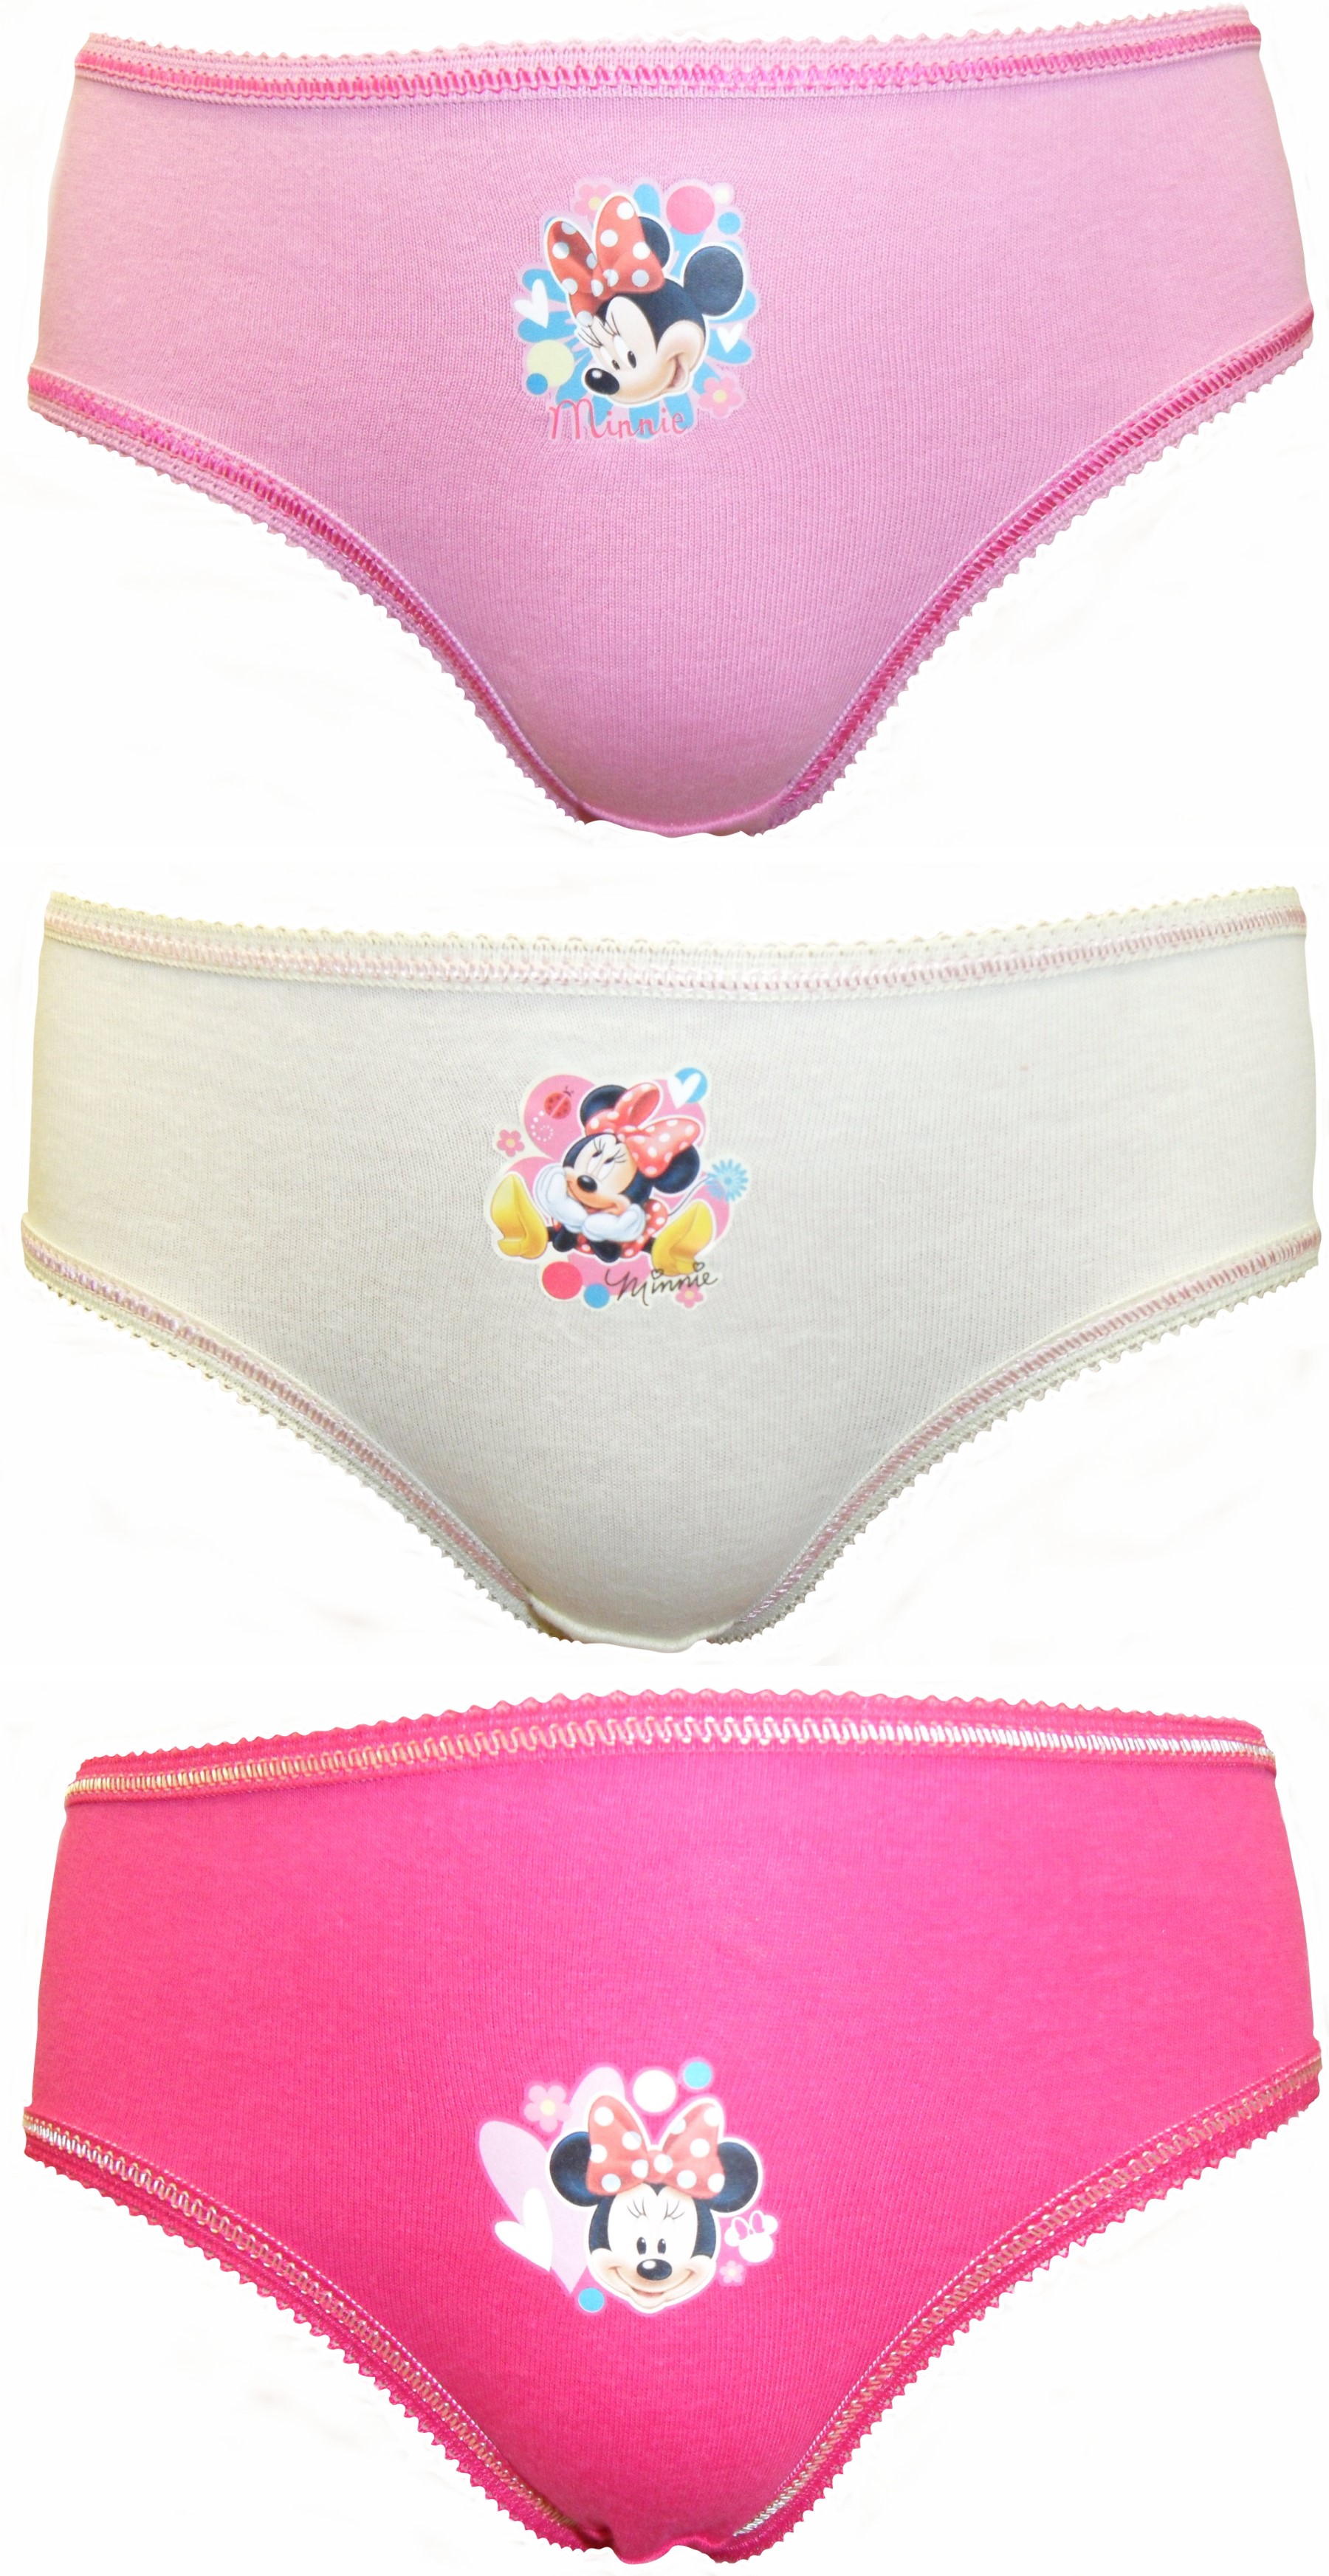 Minnie Mouse Knickers GUW25 a.JPG  by Thingimijigs